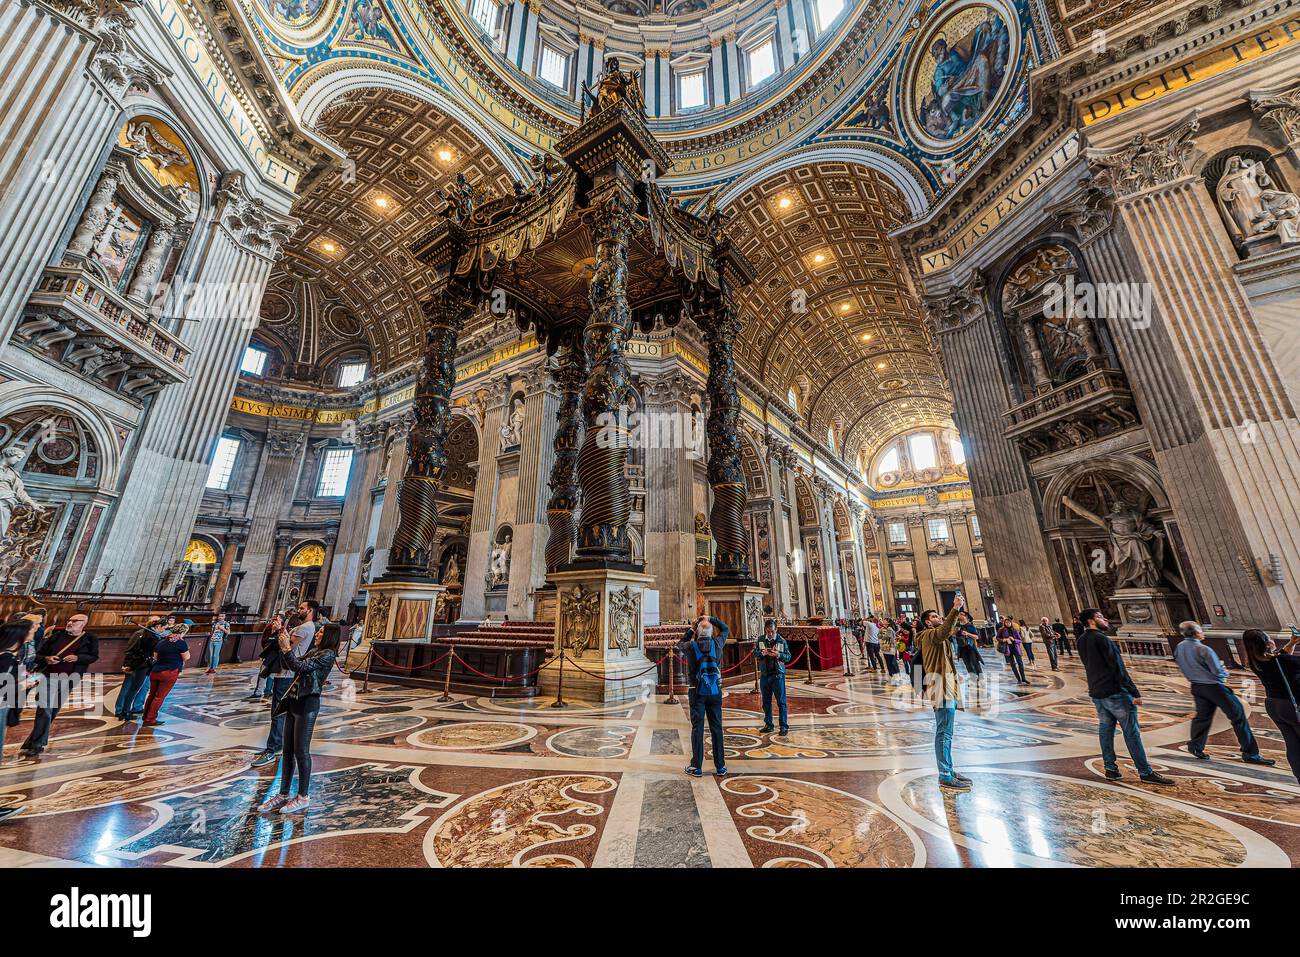 Altar of St. Peter's Basilica from inside, Rome, Lazio, Italy, Europe Stock Photo